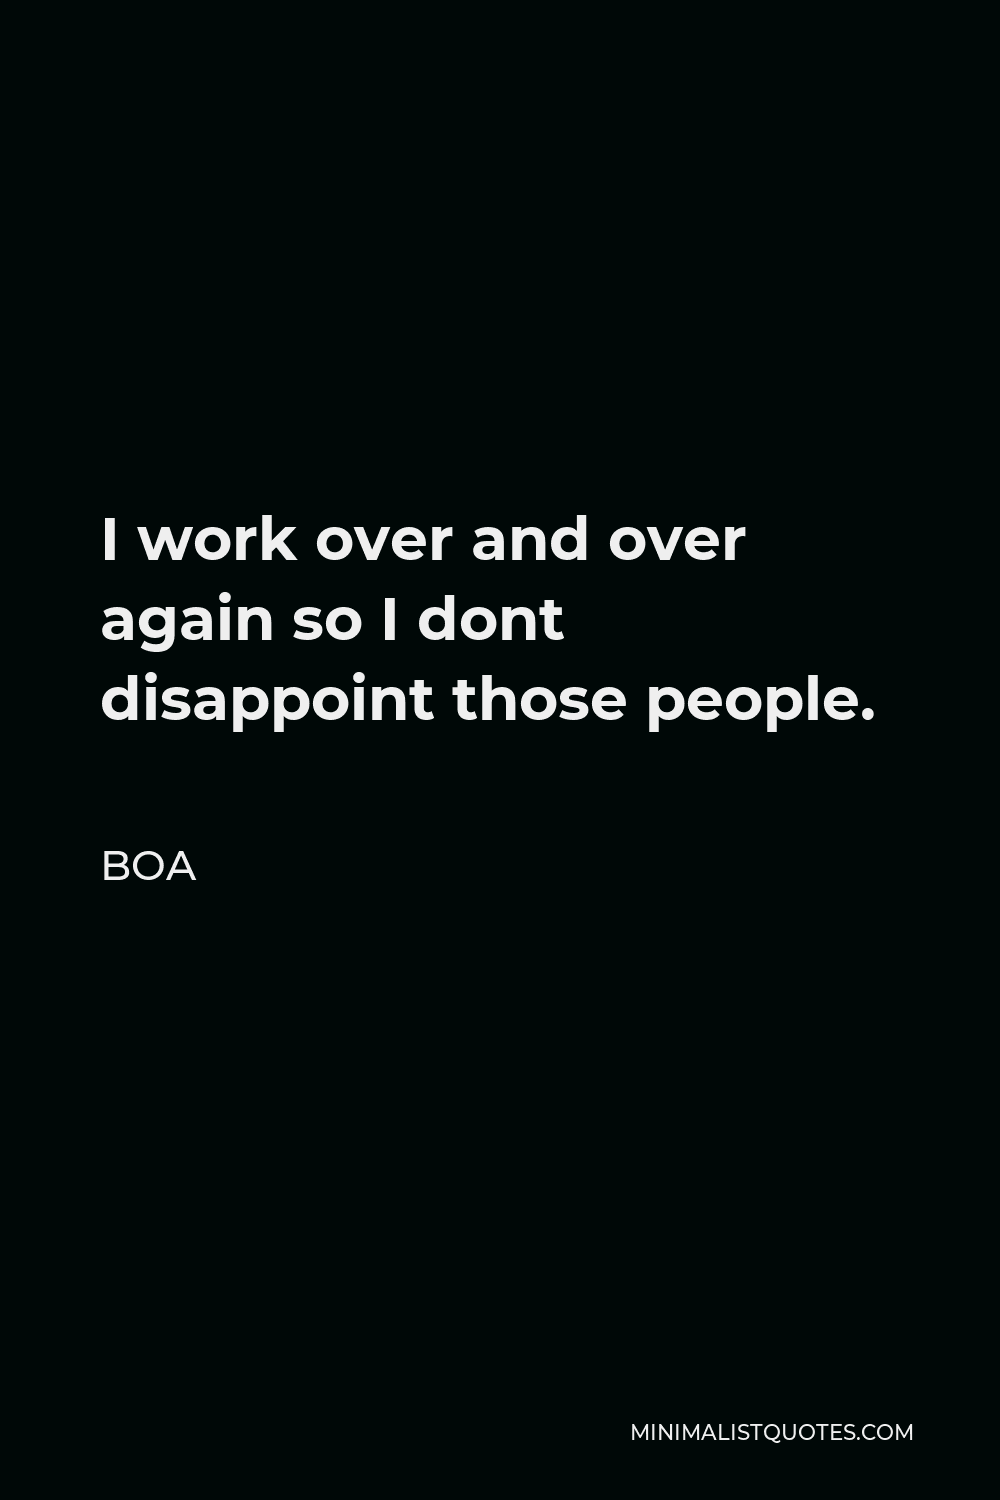 BoA Quote - I work over and over again so I dont disappoint those people.